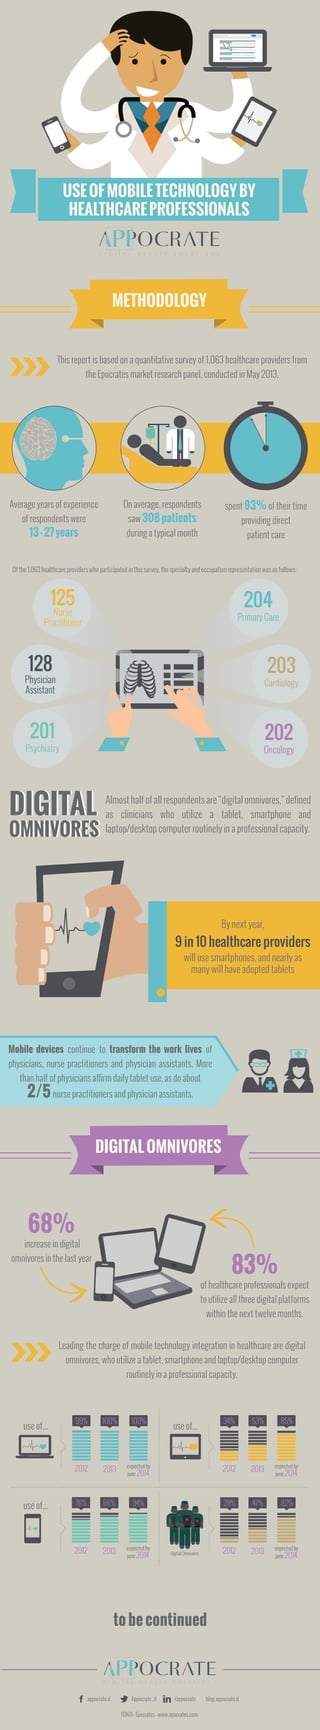 FONTI: Epocrates - www.epocrates.com
Appocrate_itappocrate.it blog.appocrate.it/appocrate
USEOFMOBILETECHNOLOGYBY
HEALTHCAREPROFESSIONALS
By next year,
9 in 10 healthcare providers
will use smartphones, and nearly as
many will have adopted tablets
Almost half of all respondents are “digital omnivores,” defined
as clinicians who utilize a tablet, smartphone and
laptop/desktop computer routinely in a professional capacity.
DIGITAL OMNIVORES
DIGITAL
OMNIVORES
DIGITAL
OMNIVORES
Mobile devices continue to transform the work lives of
physicians, nurse practitioners and physician assistants. More
than half of physicians affirm daily tablet use, as do about
2/5nurse practitioners and physician assistants.
Leading the charge of mobile technology integration in healthcare are digital
omnivores, who utilize a tablet, smartphone and laptop/desktop computer
routinely in a professional capacity.
increase in digital
omnivores in the last year
68%
of healthcare professionals expect
to utilize all three digital platforms
within the next twelve months.
83%
2012
99%
2013
100%
expected by
june 2014
100%
2012
76%
2013
86%
expected by
june 2014
94%
2012
34%
2013
53%
expected by
june 2014
85%
2012
28%
2013
47%
expected by
june 2014
82%
Digital Omnivores
to be continued
use of...
use of...
use of...
METHODOLOGY
This report is based on a quantitative survey of 1,063 healthcare providers from
the Epocrates market research panel, conducted in May 2013.
Of the 1,063 healthcare providers who participated in this survey, the specialty and occupation representation was as follows:
128
Physician
Assistant
125
Nurse
Practitioner
204
Primary Care
202
Oncology
203
Cardiology
Psychiatry
201
On average, respondents
saw 308patients
during a typical month
spent 93%of their time
providing direct
patient care
Average years of experience
of respondents were
13-27years
 